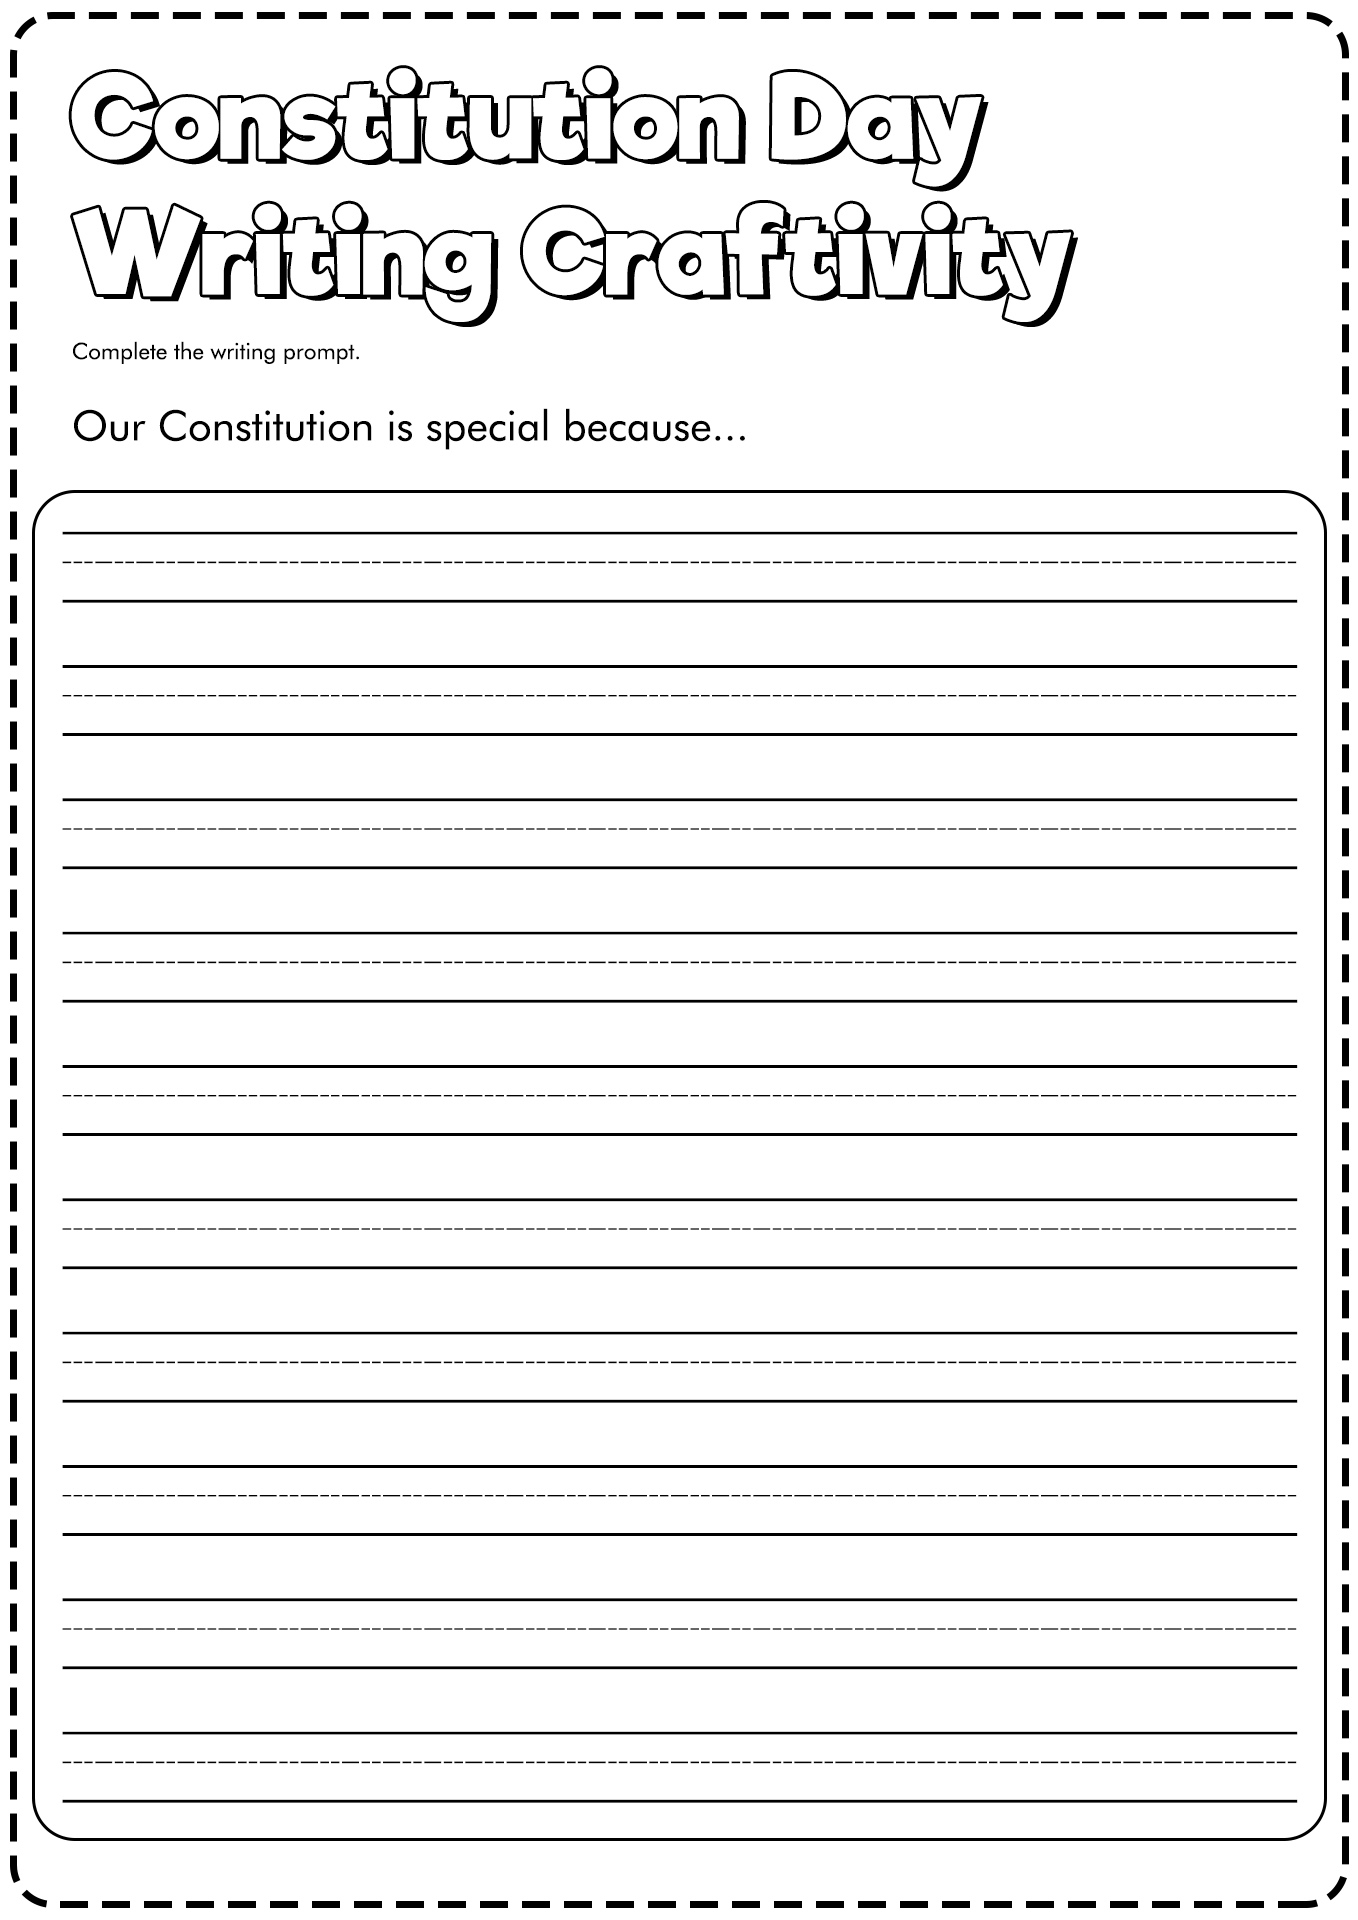 11 Best Images Of Constitution Activity Worksheets Constitution Day